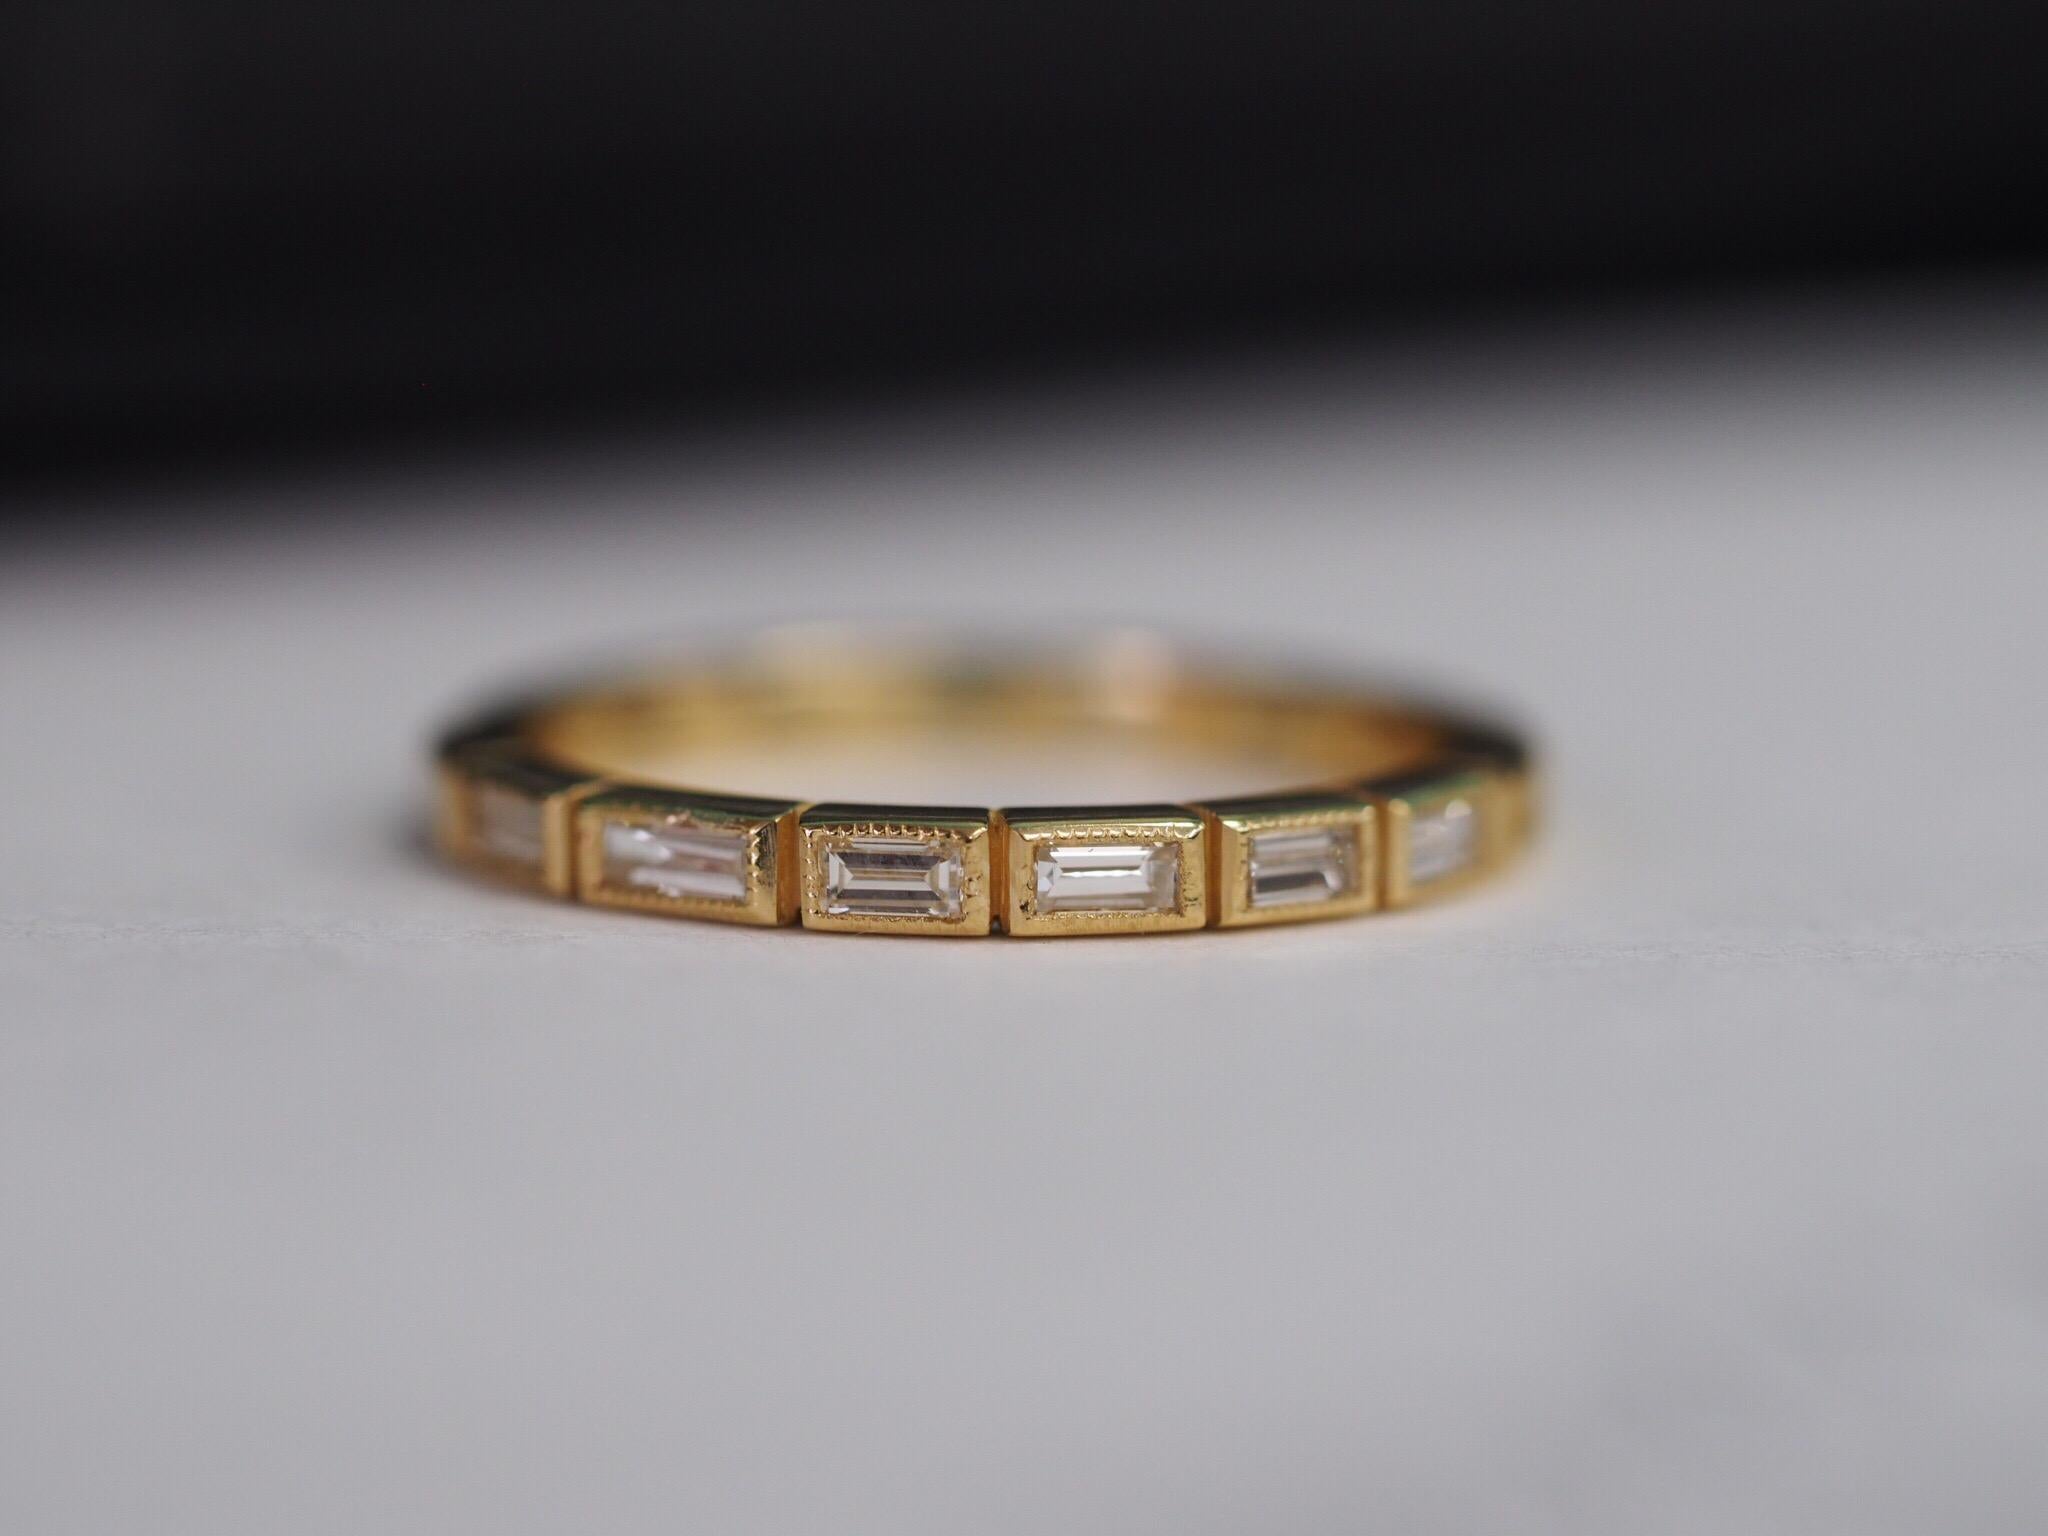 18 Karat Yellow Gold custom made eternity band with 0.61ct total weight of baguette diamonds. Each diamond is individually bezel set with a milgrain edging giving it the gorgeous ‘Art Deco’ look. Size 6.5